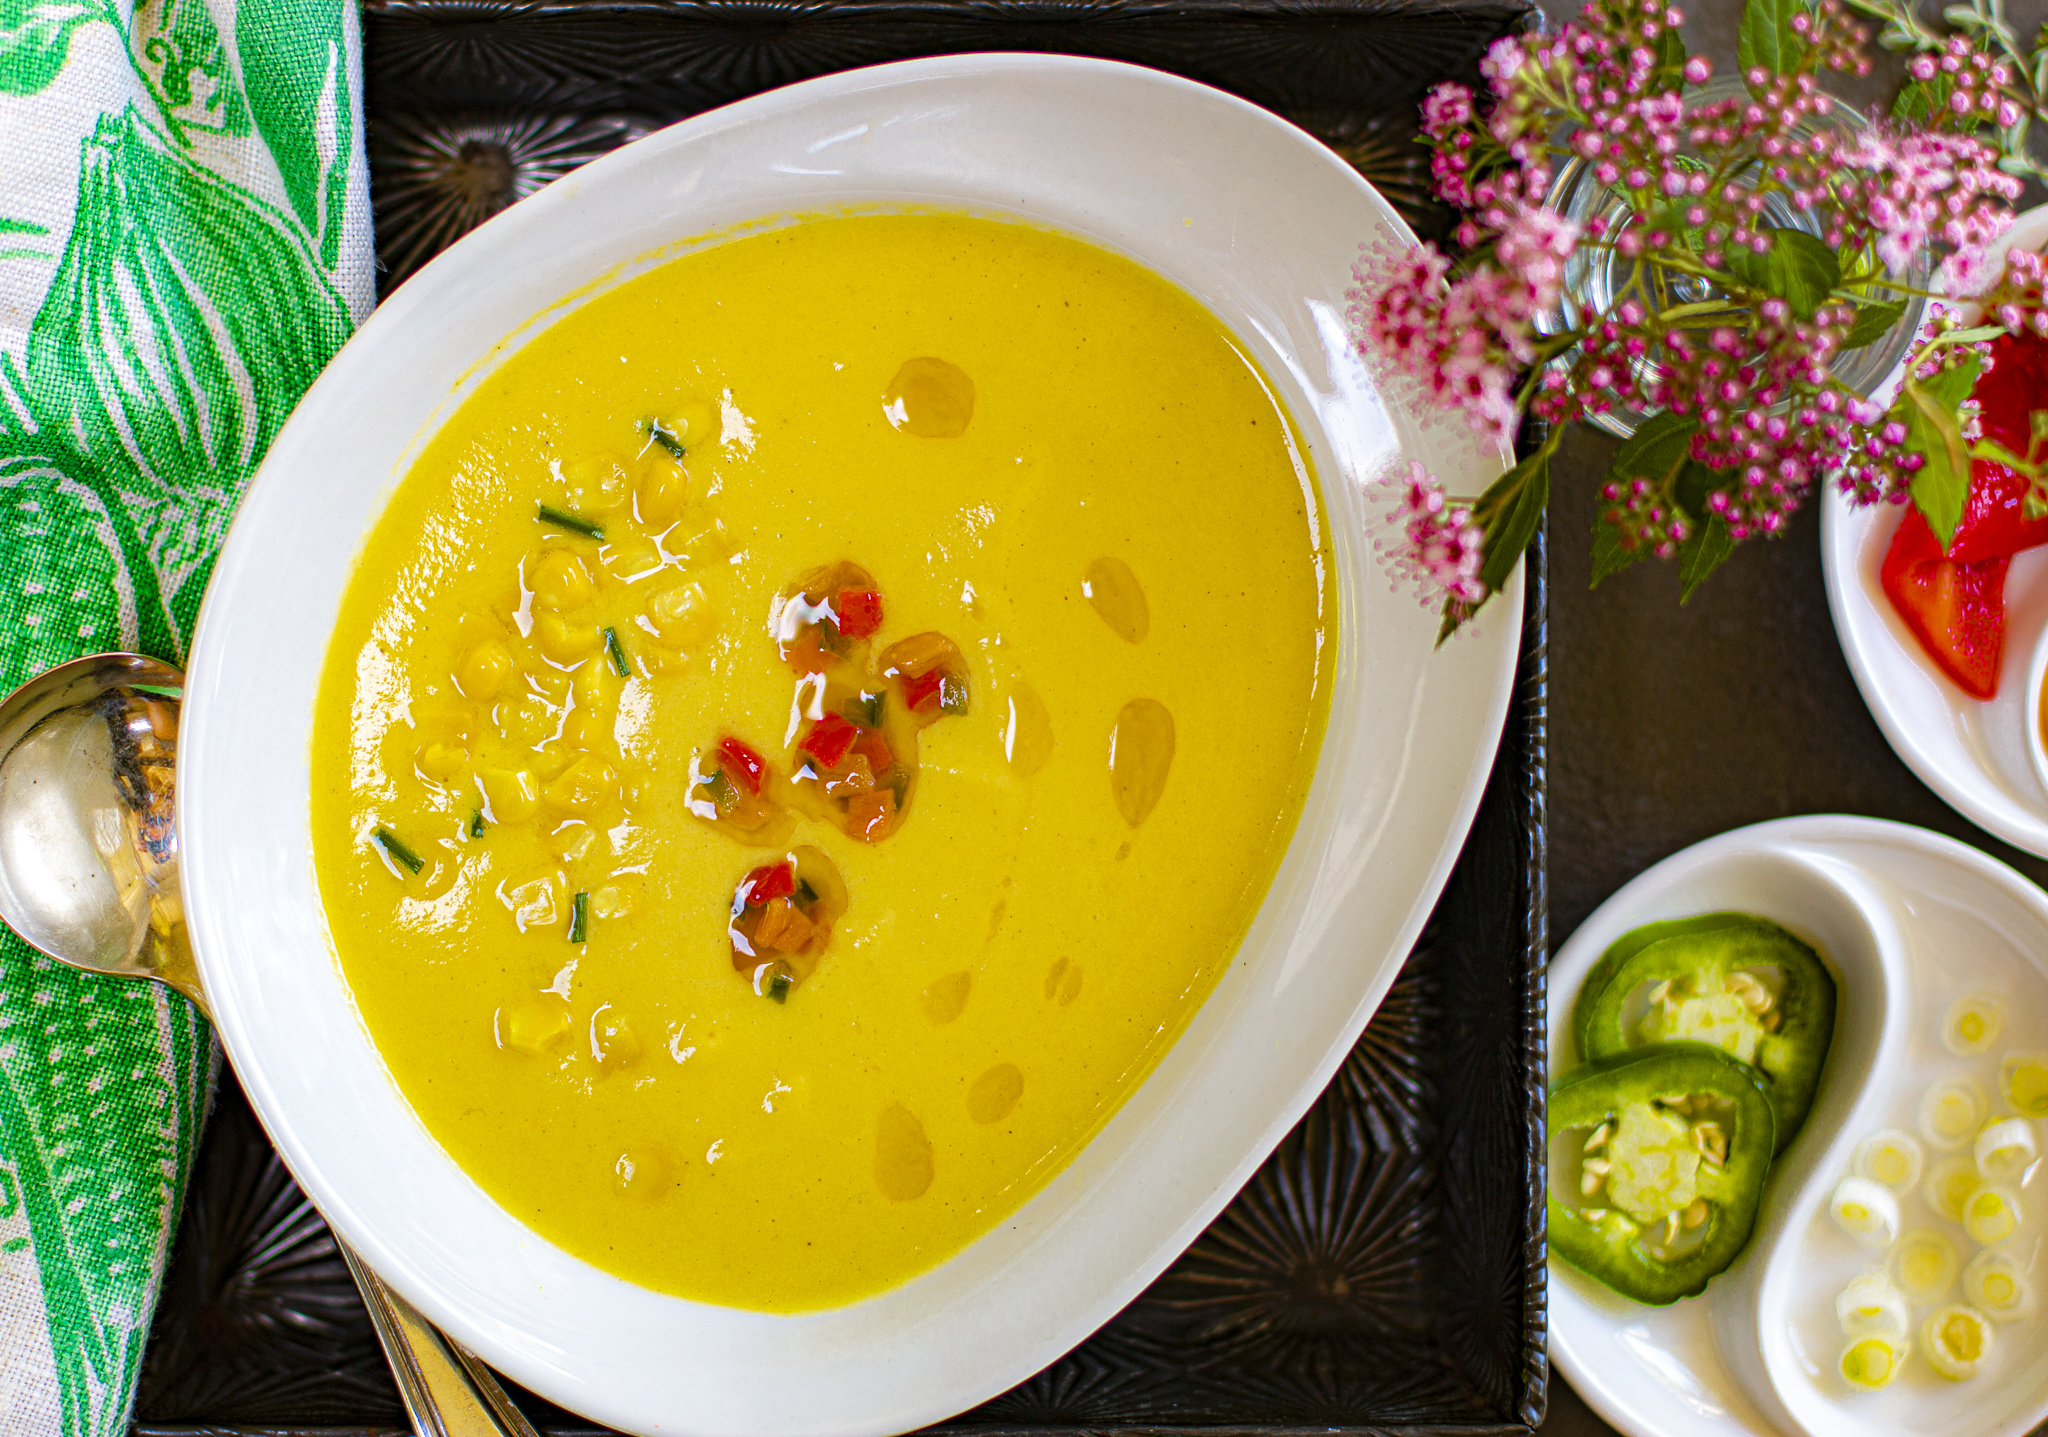 Velvety Cool Corn Soup with a Roasted Peppers & Jalapeño Garnish